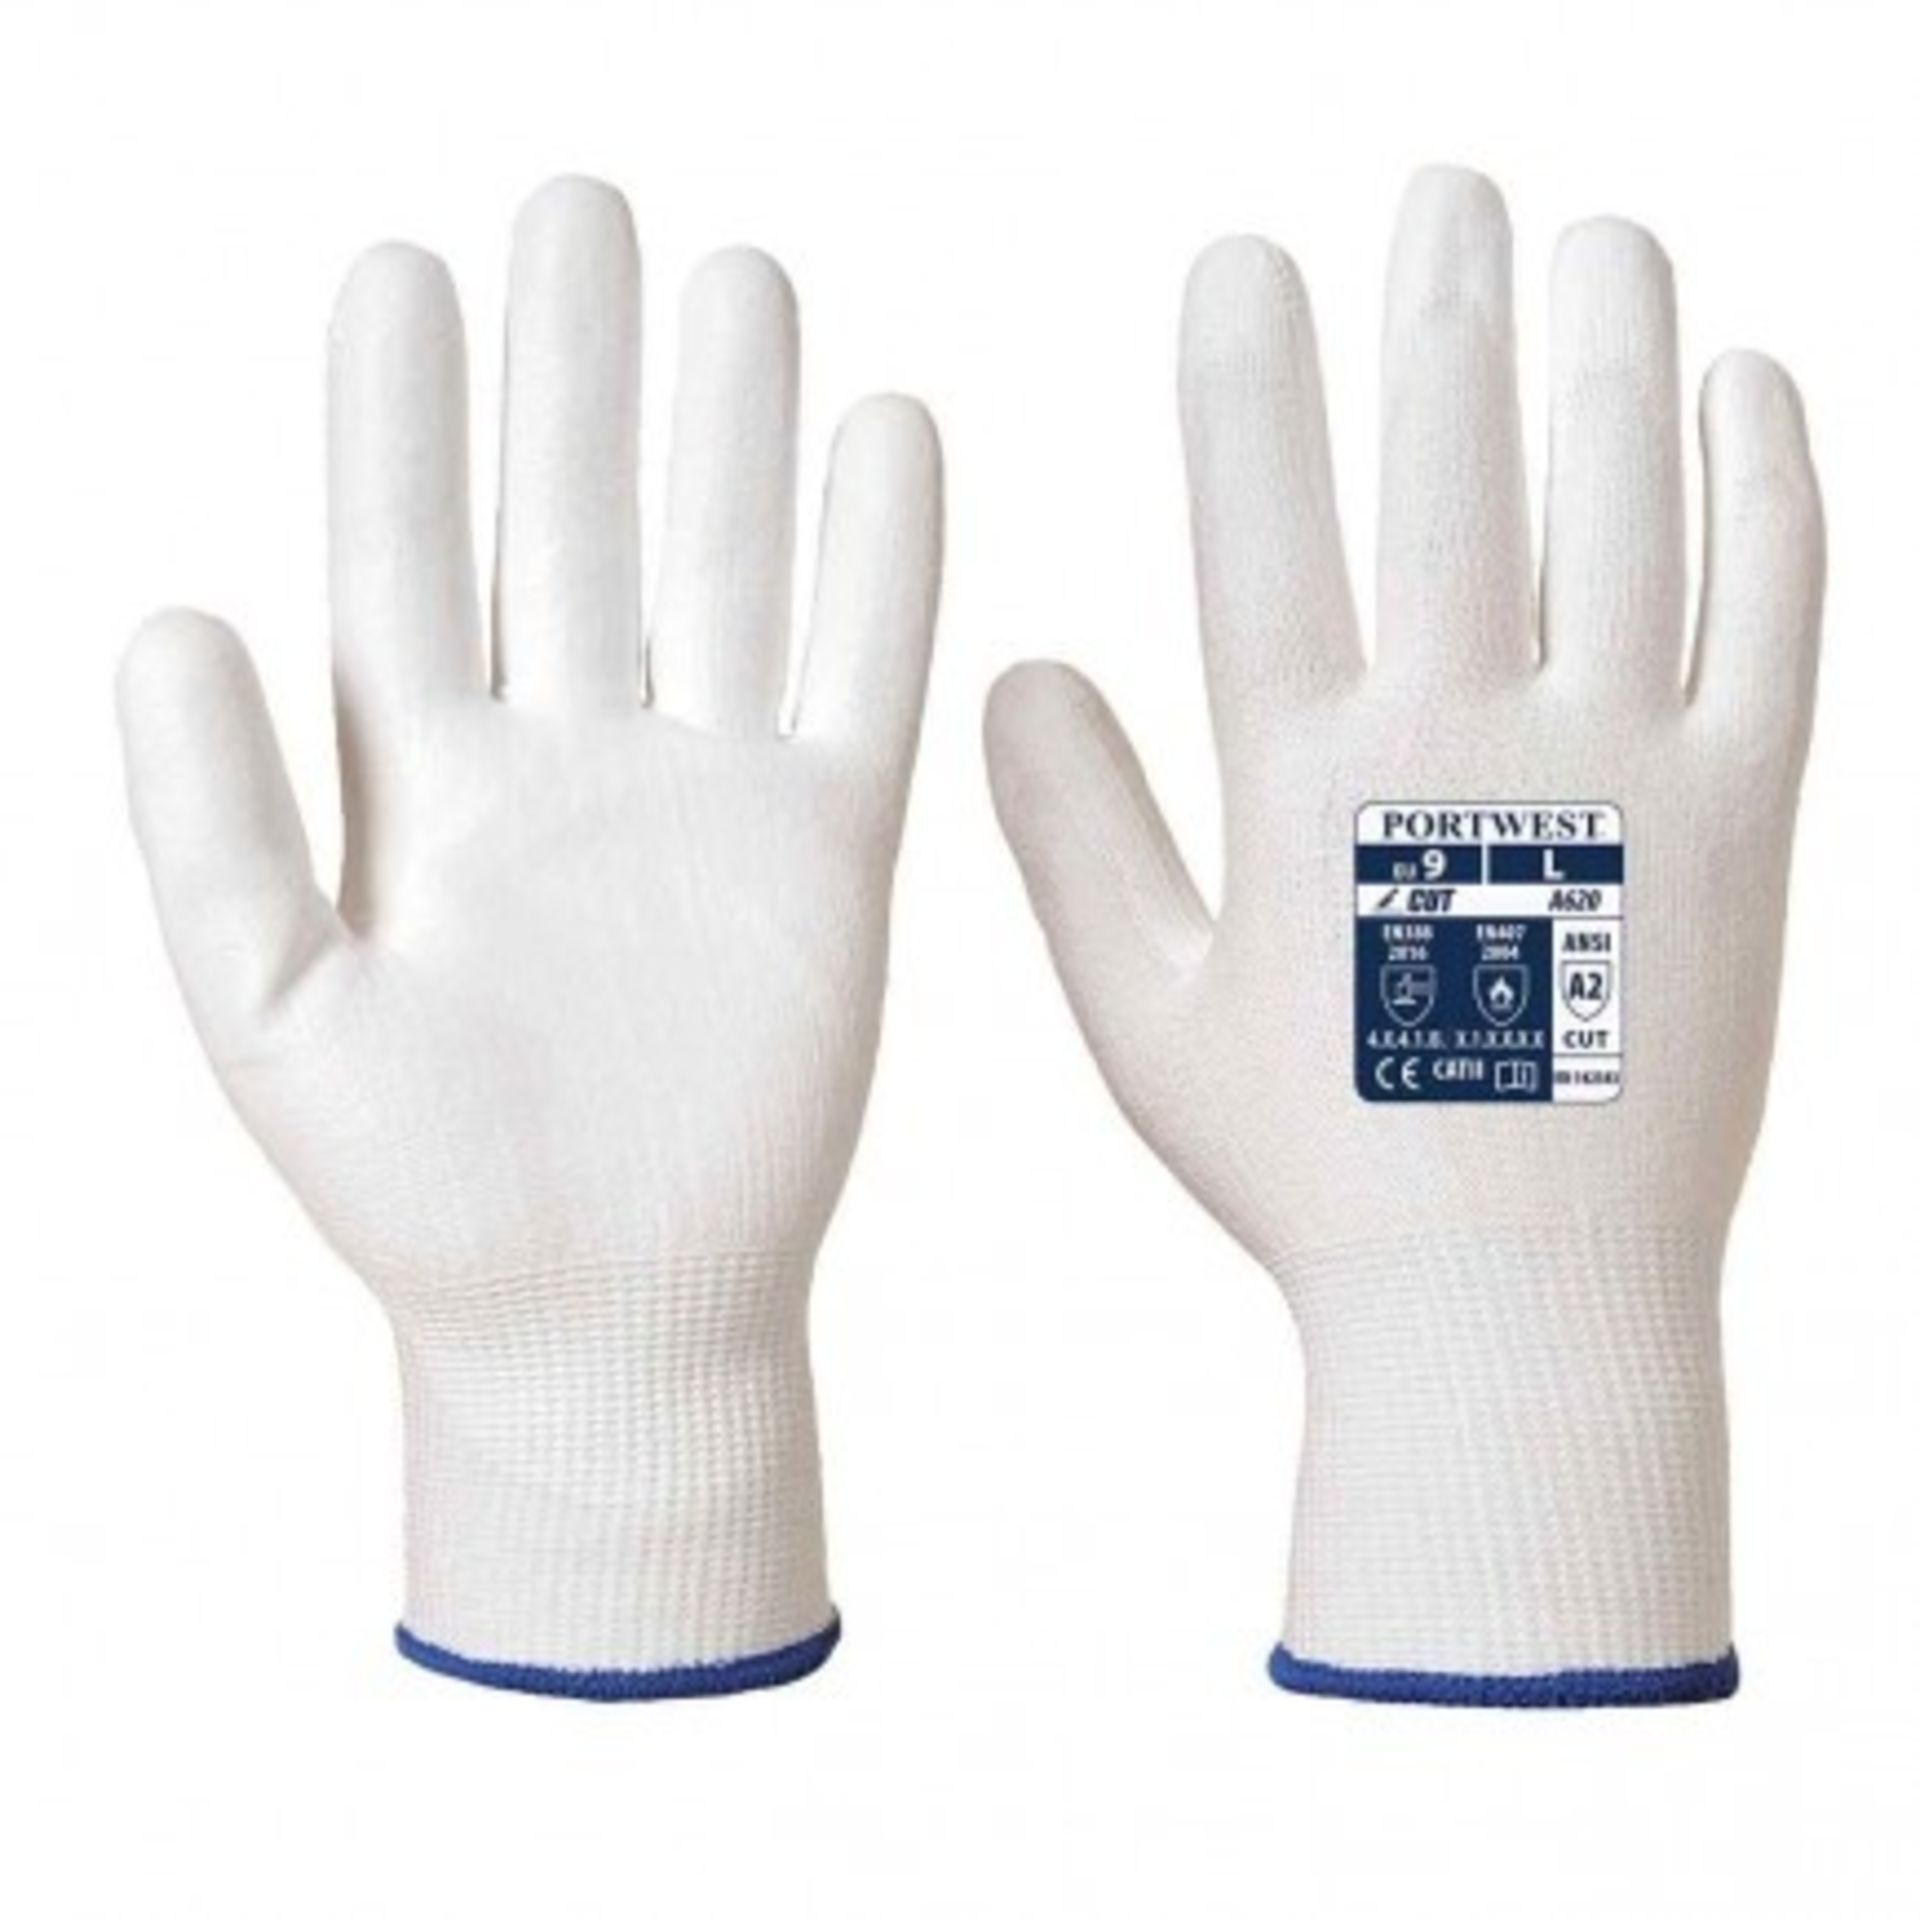 Brand New Portwest 144x Pairs of PU Palm Gloves -Small £2.70 Each (R44)